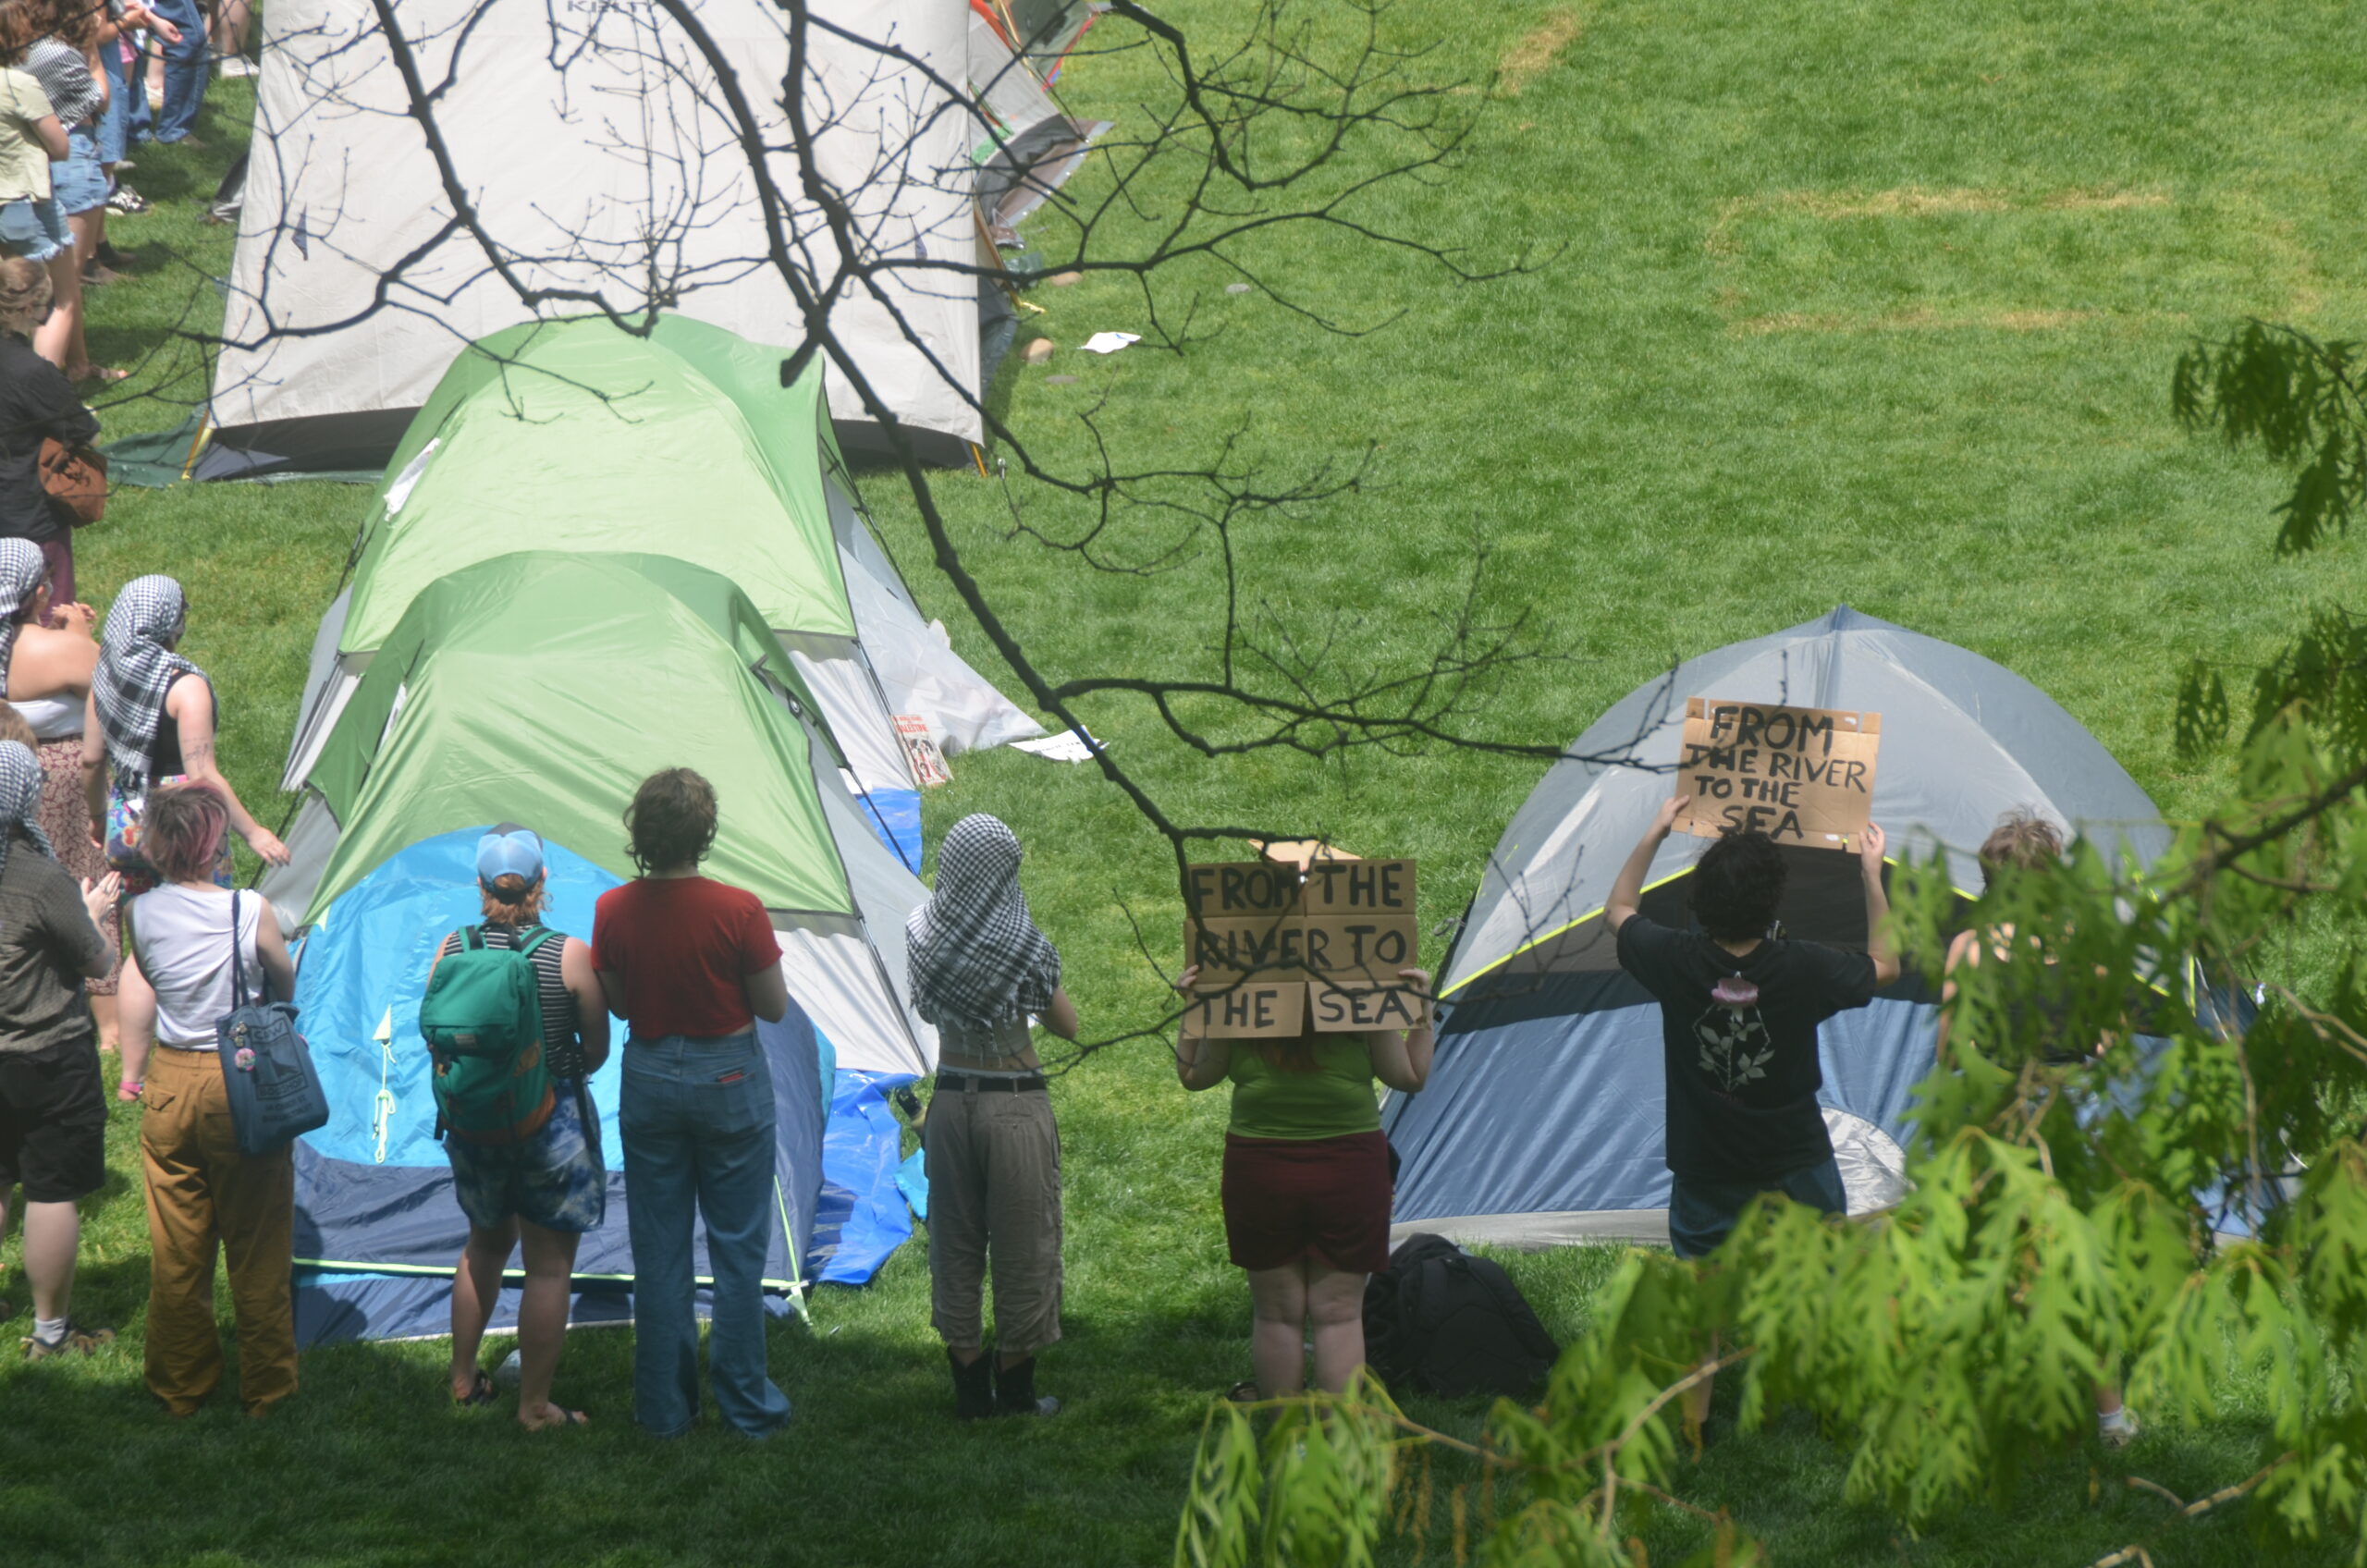 Day 5 at Bryn Mawr College Encampment on Merion Green Sees Increasing Tensions Between Admin and Protestors